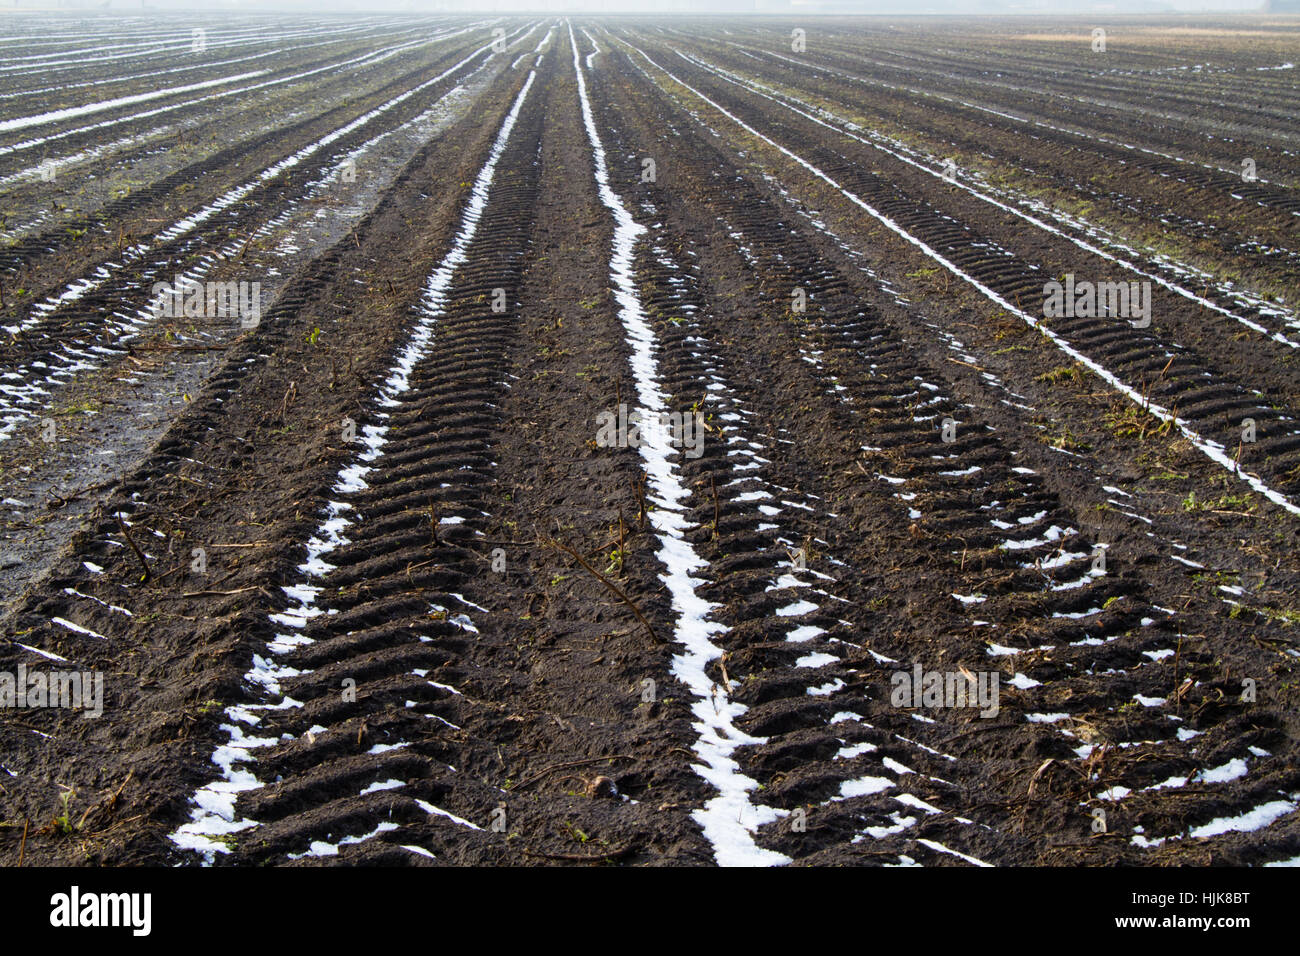 Tire tracks leading towards the horizon on a frozen and snowy agricultural field Stock Photo